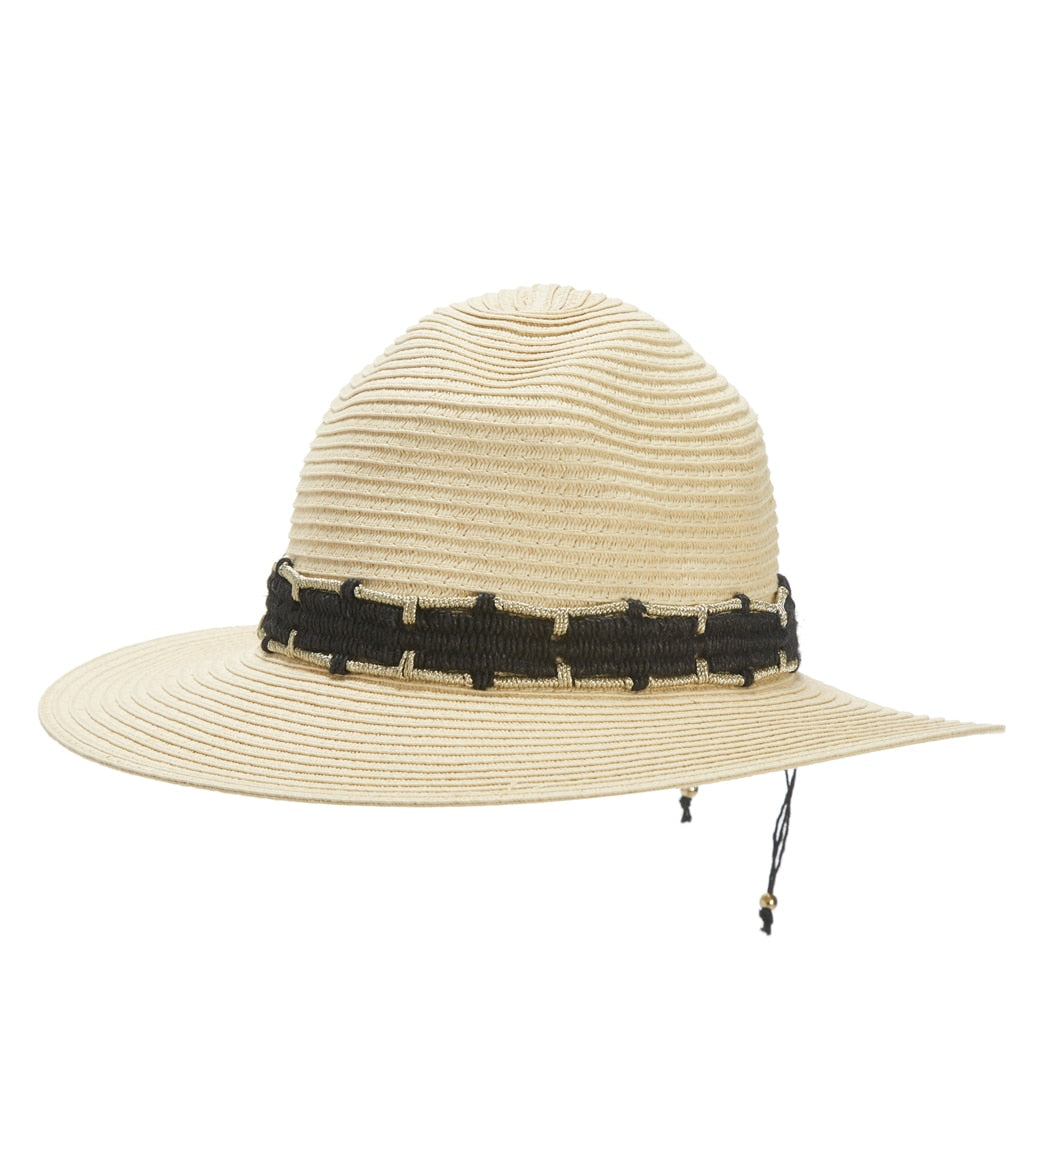 Wallaroo Women's Darby Straw Hat - Ivory/Taupe One Size | Polyester - Swimoutlet.com